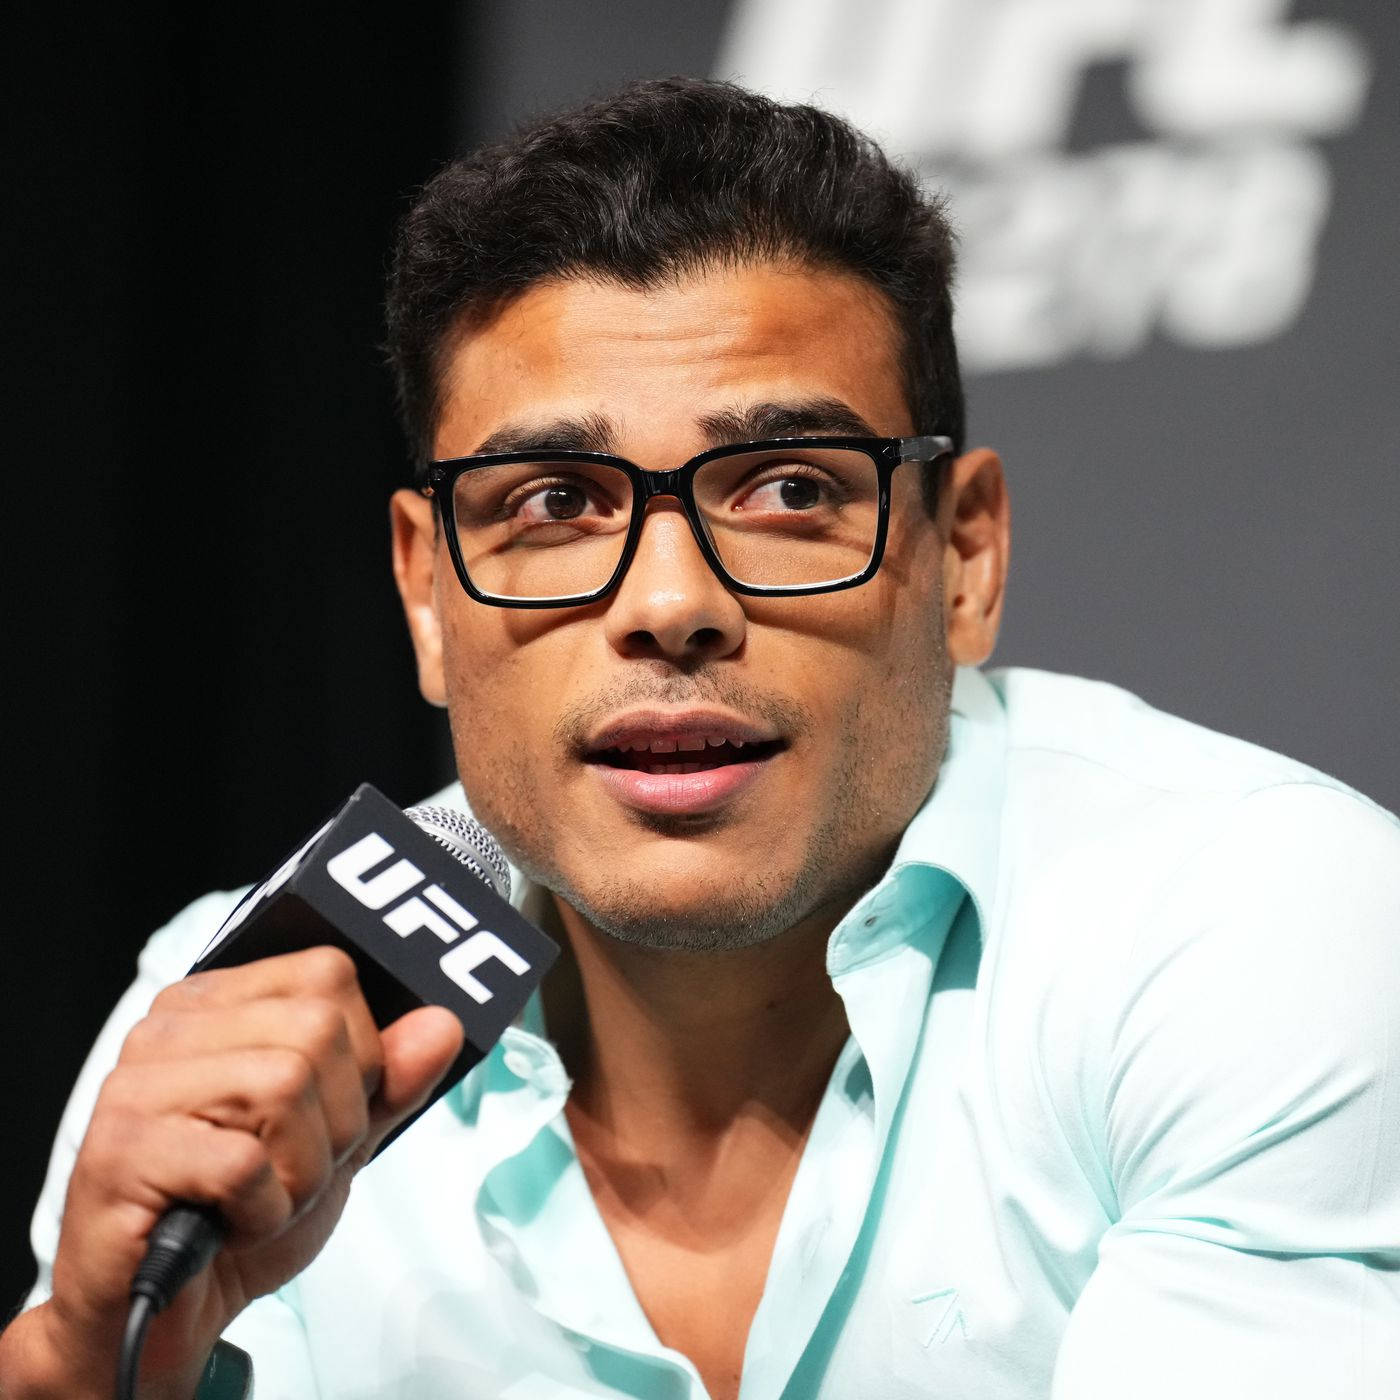 Paulo Costa With Glasses Wallpaper